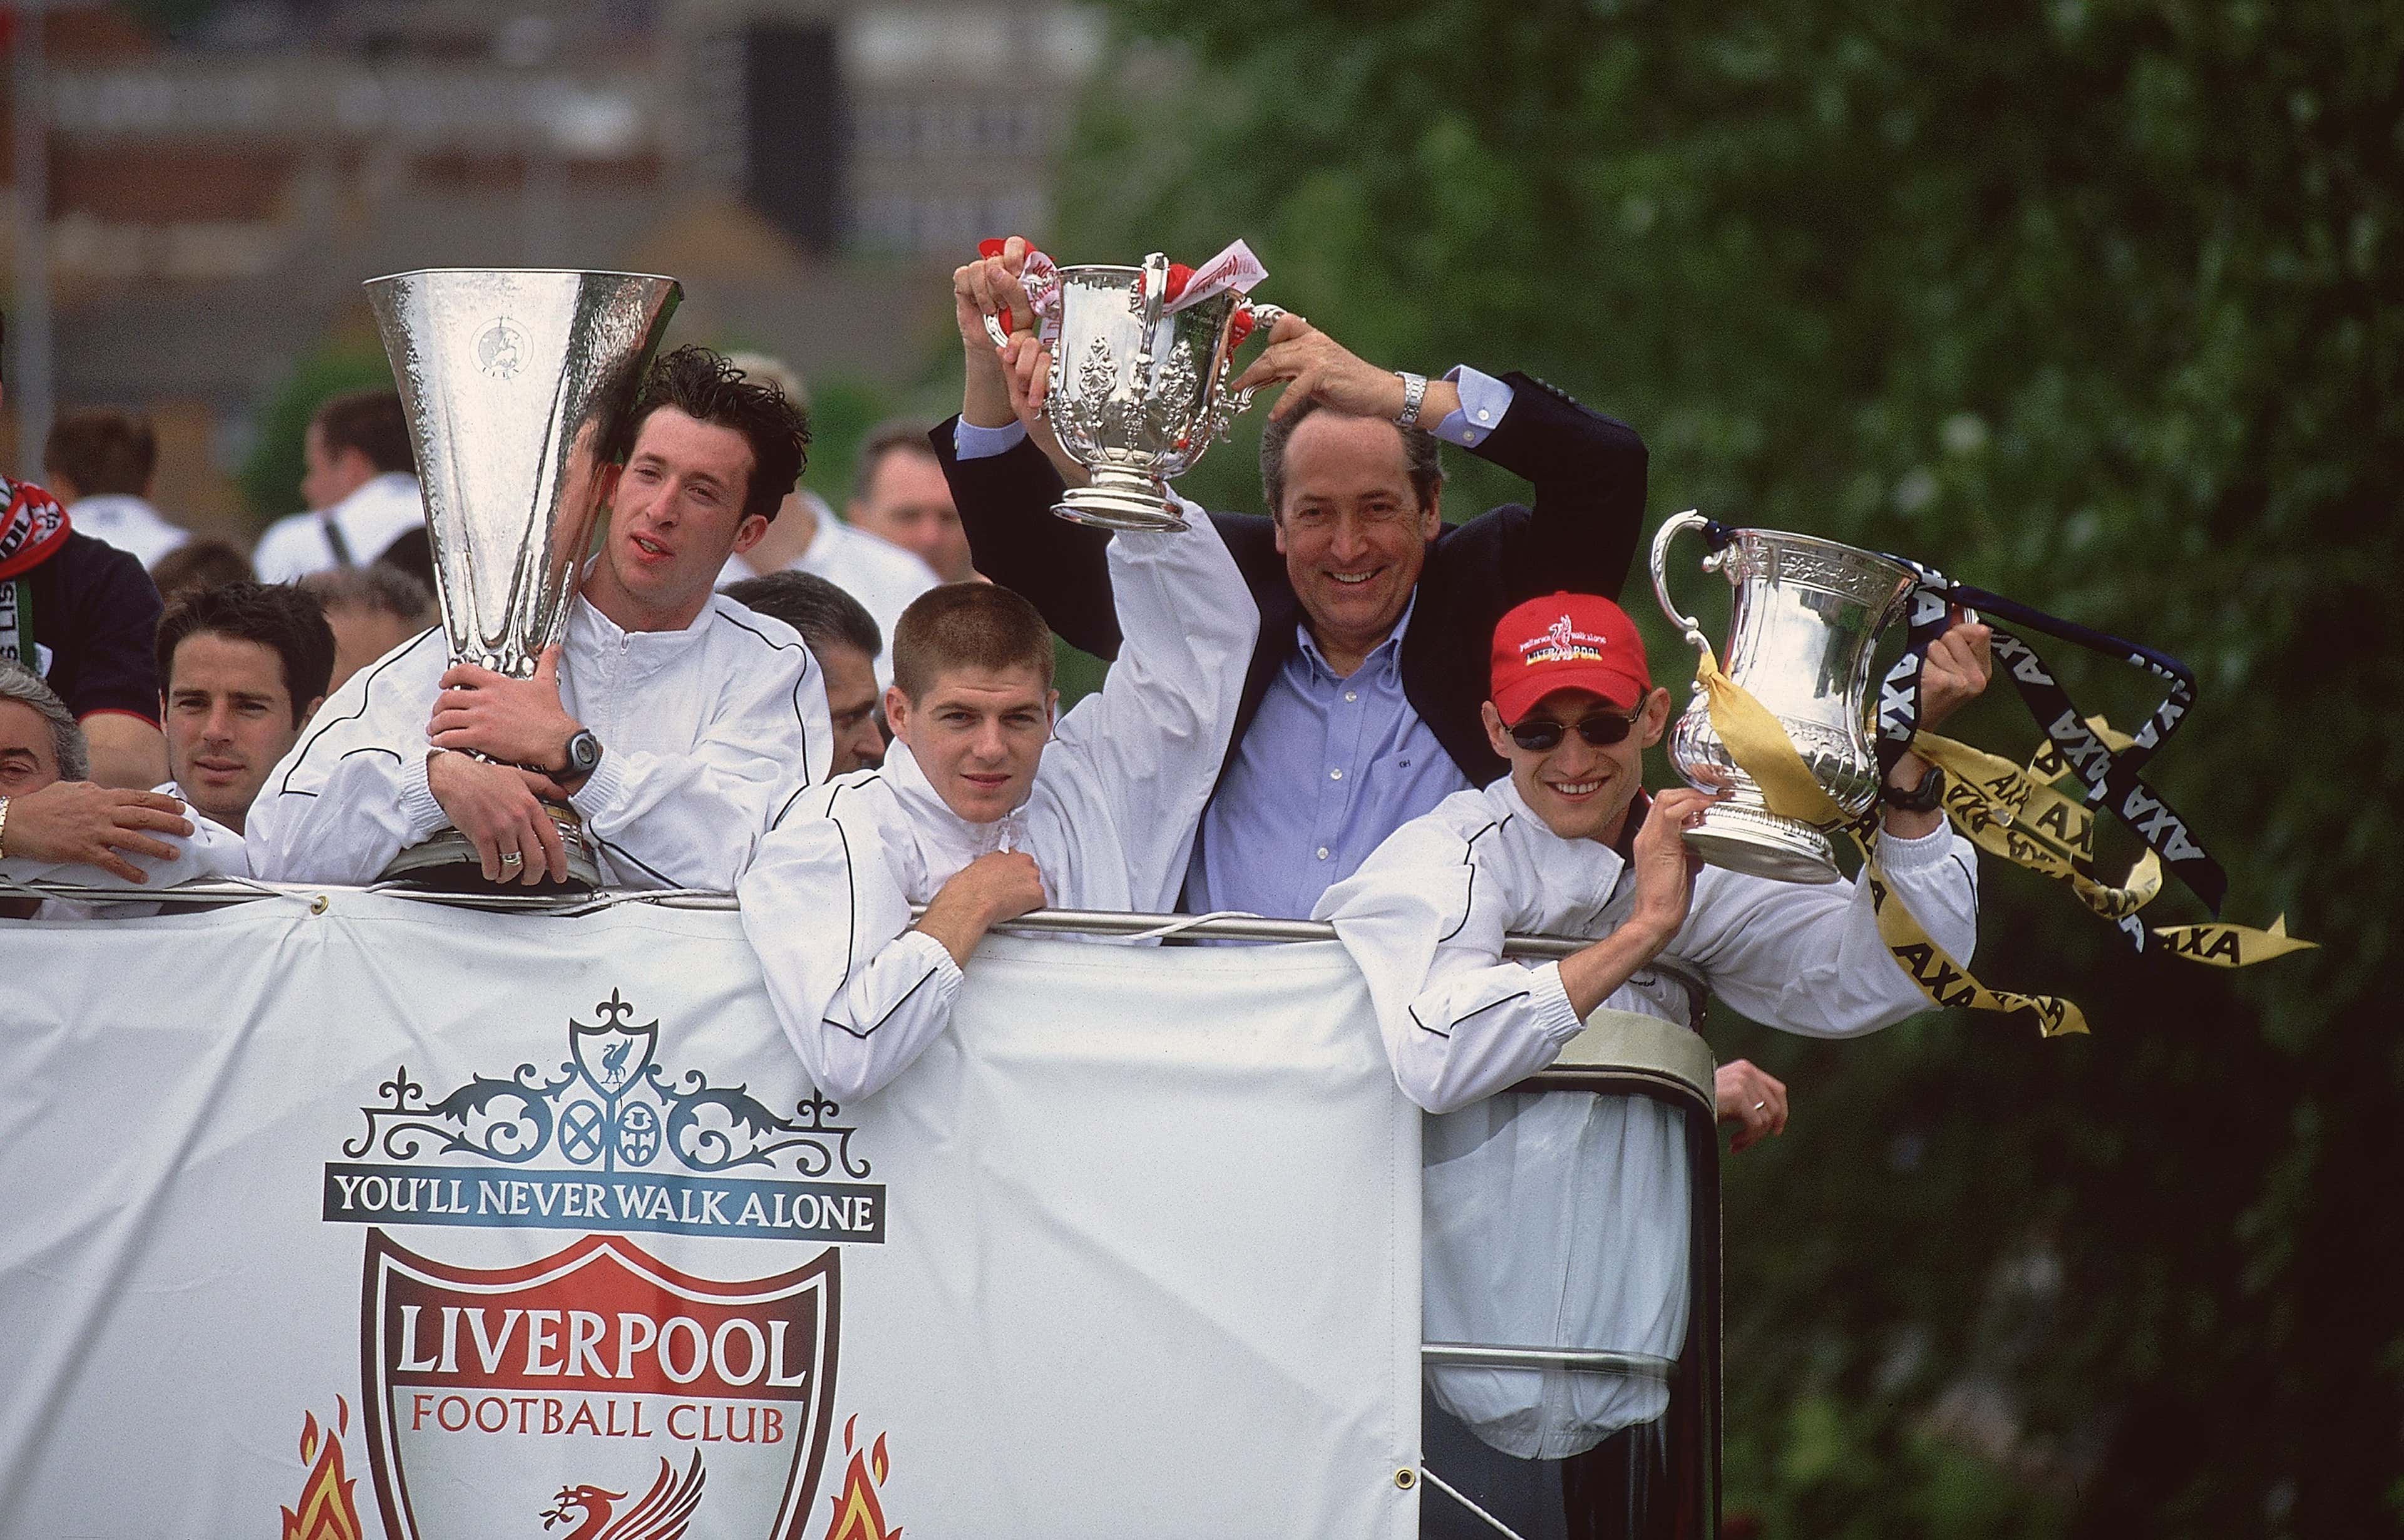 Robbie Fowler, Steven Gerrard, Gerard Houllier and Sami Hyypia - Liverpool